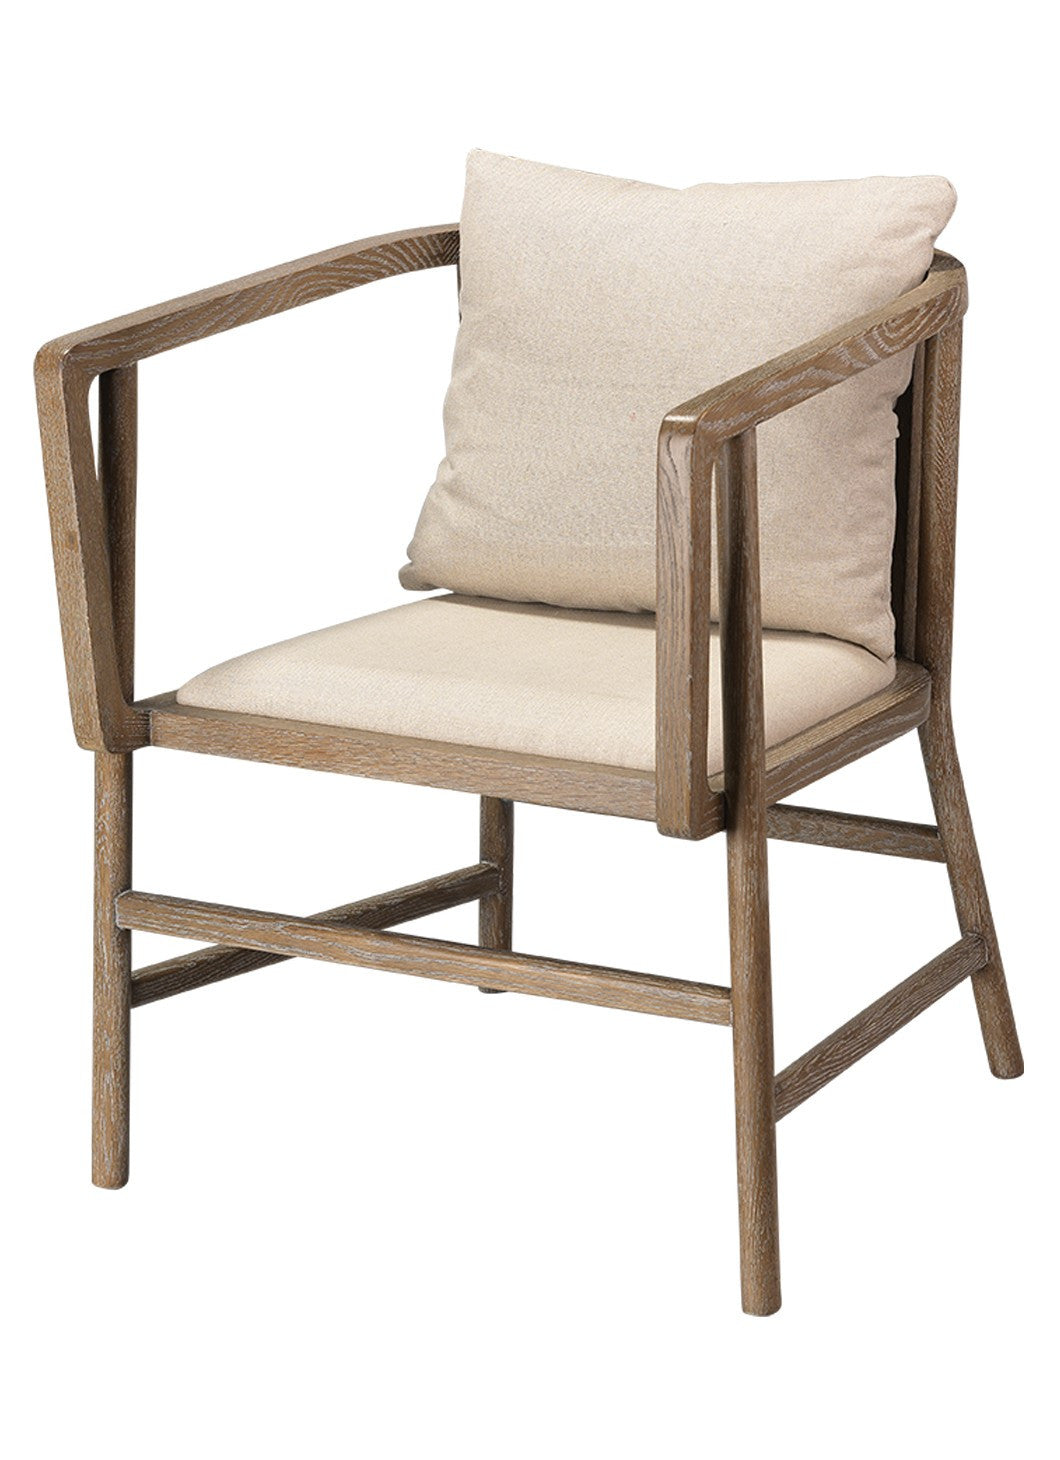 Jamie Young Grayson Arm Chair Grey Wood Off White Linen